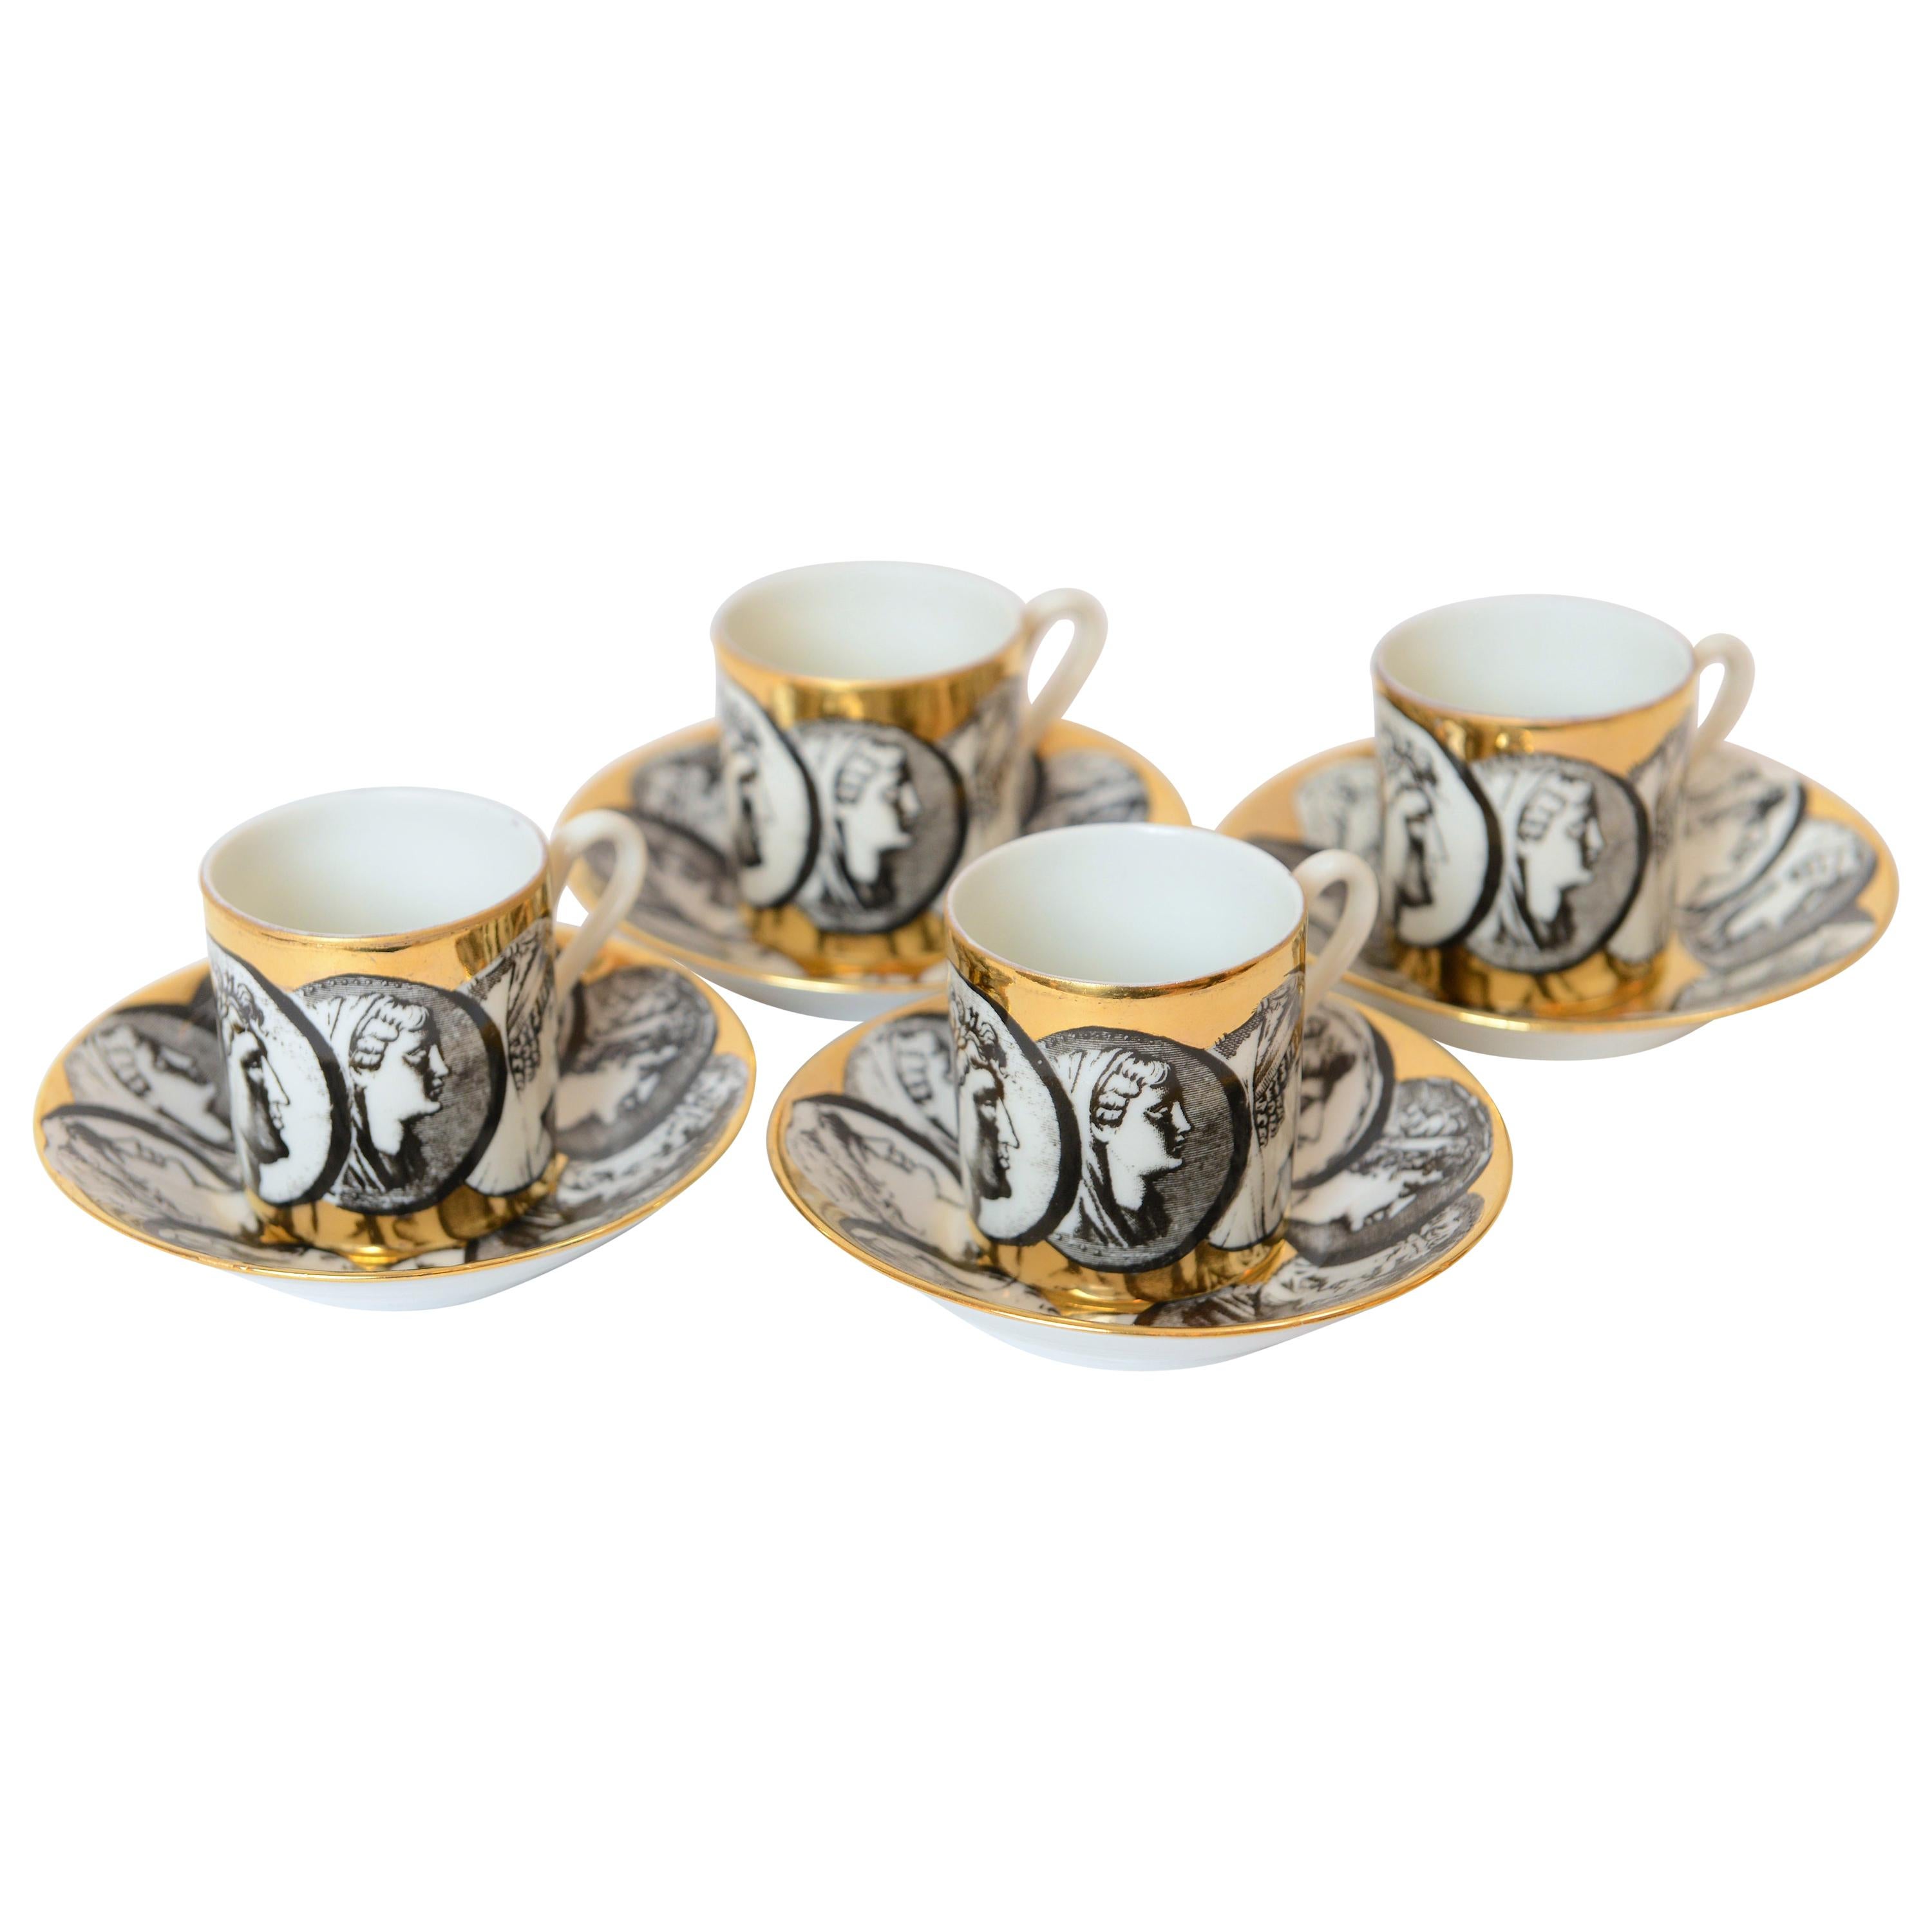 https://a.1stdibscdn.com/1950s-piero-fornasetti-cammei-espresso-cups-and-saucers-italy-for-sale/1121189/f_153550321562391672987/15355032_master.jpg